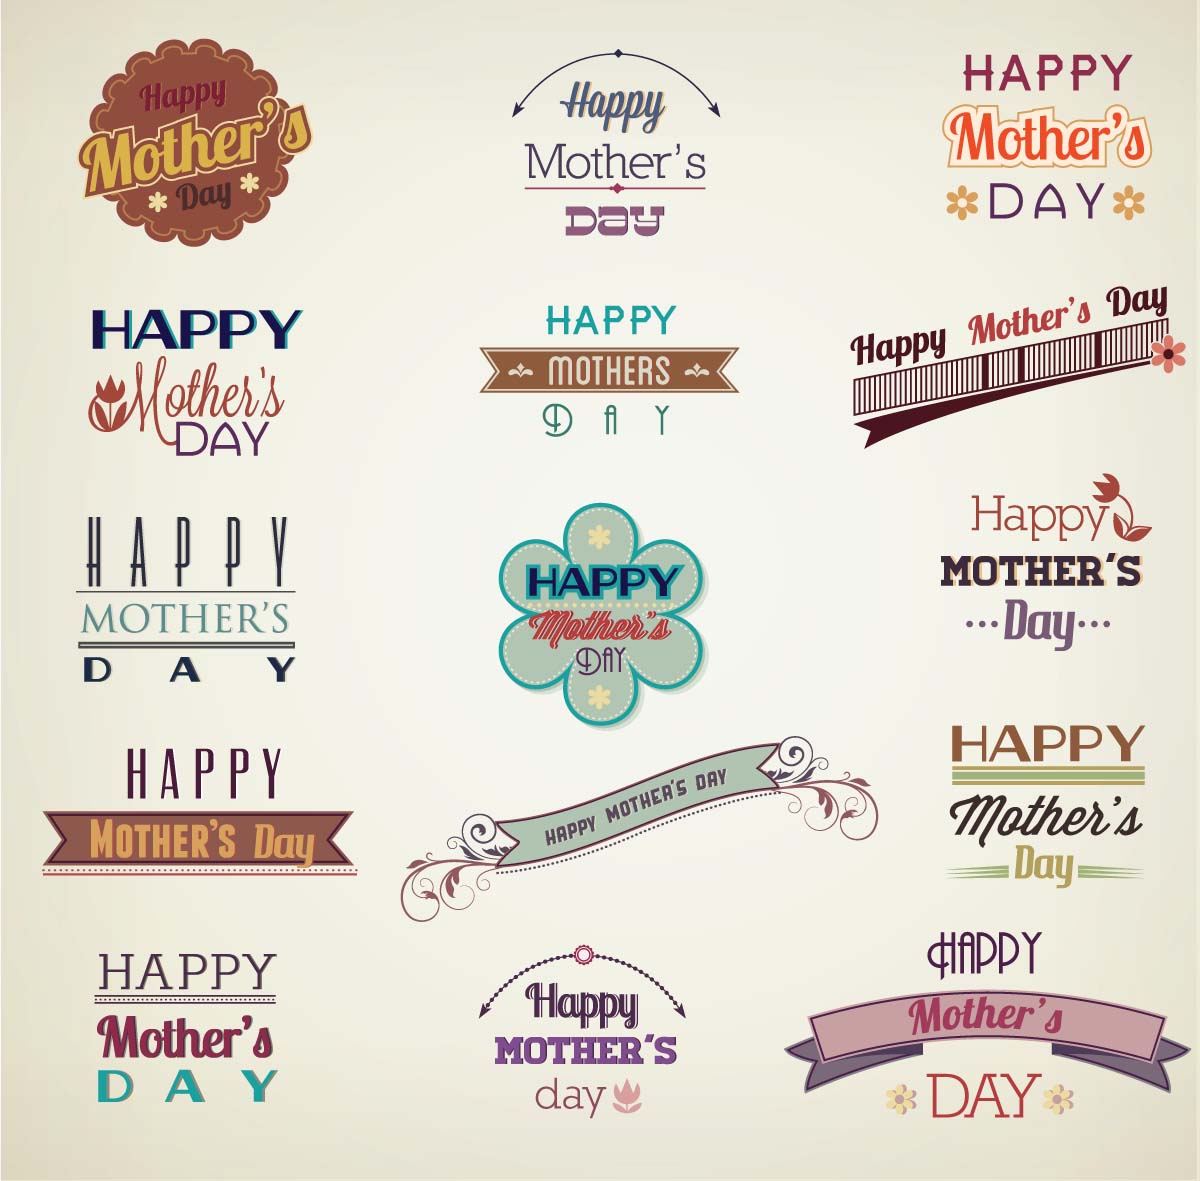 Decorative elements for Mother's Day set vector